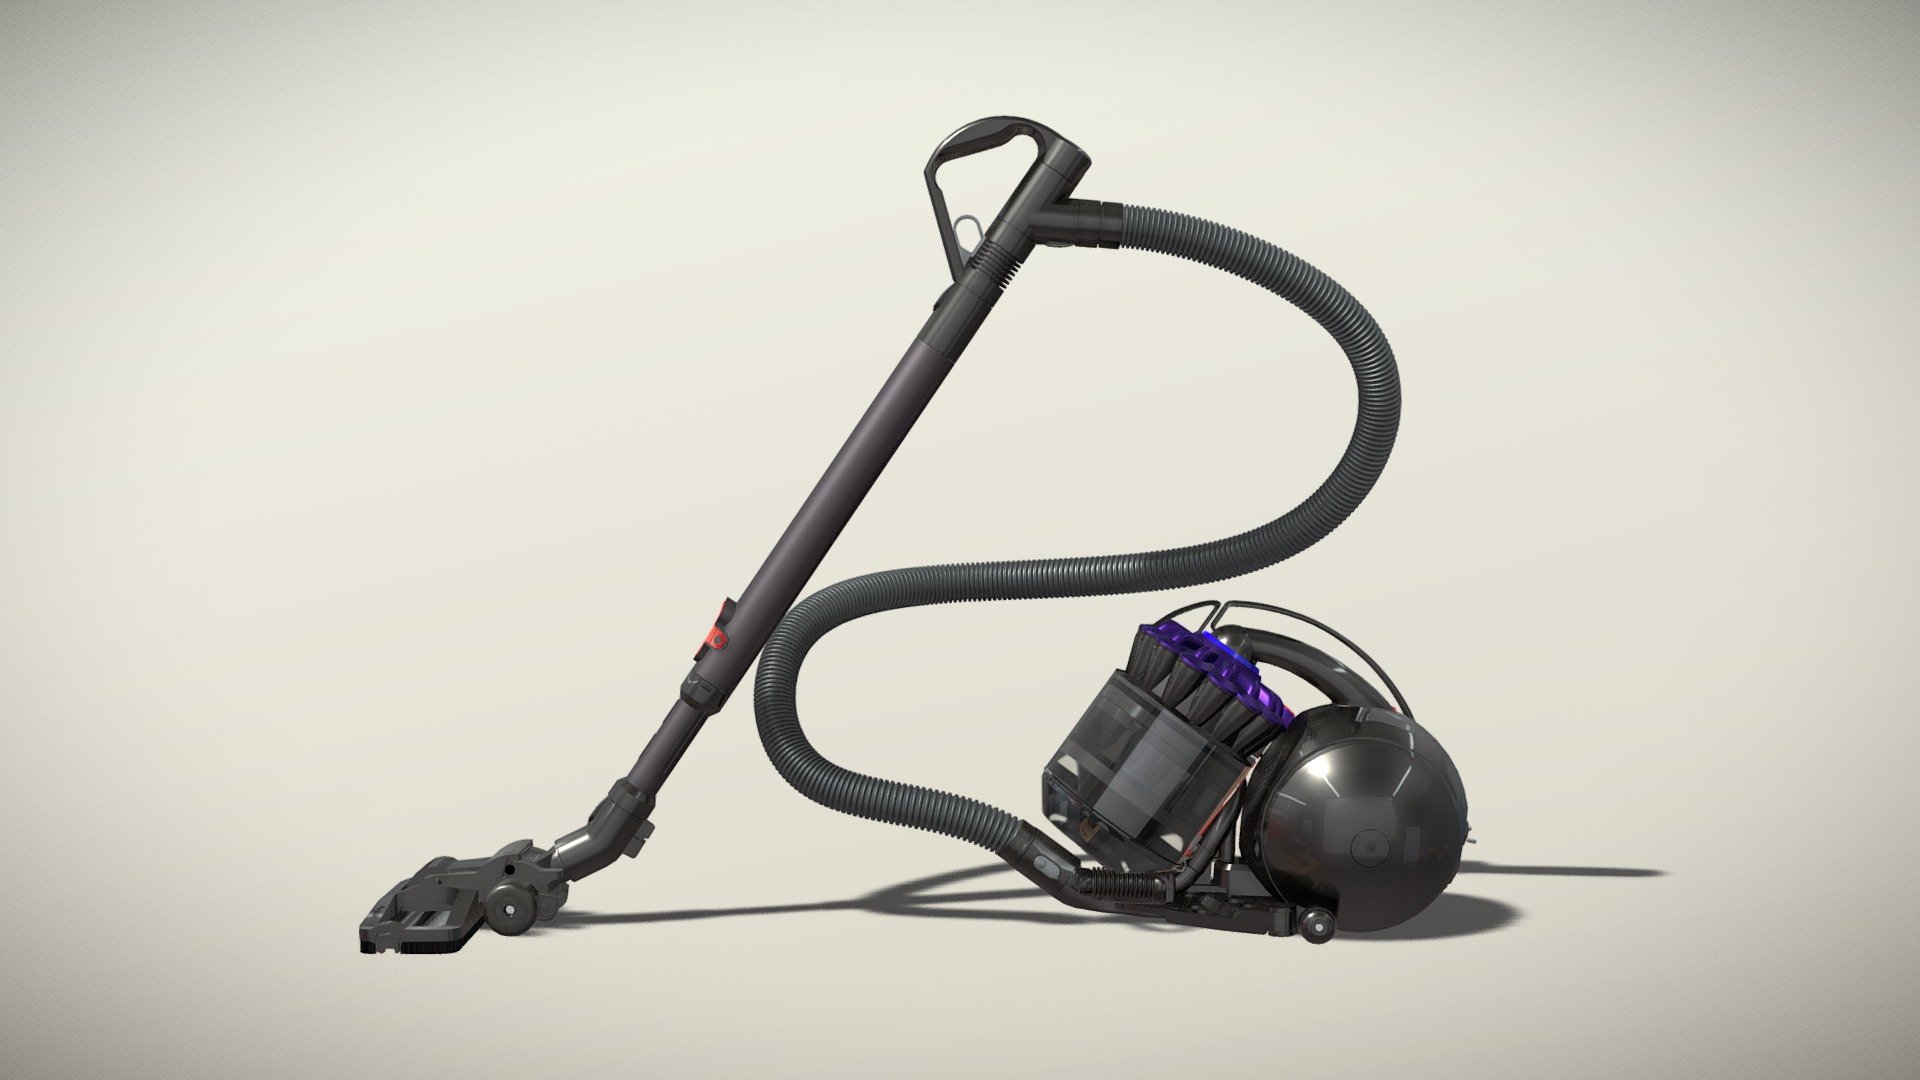 •         Let me present to you high-quality middle-poly 3D model of vacuum cleaner Dyson DC37. Modeling was made with ortho-photos of real vacuum cleaner that is why all details of design are recreated most authentically.

•        The model uses 18 simple colored materials and 6 materials with 4 textures used in various combination and 2 of them is used as mask for sign, logos etc.

•   The model is Rigged in Maya and has Character set with 6 poses. This Rig Setup mainly expects to set any static pose for interior or object visualization, but simple animation you can create too.

•   &ldquo;NOT_RIGGED_POSES